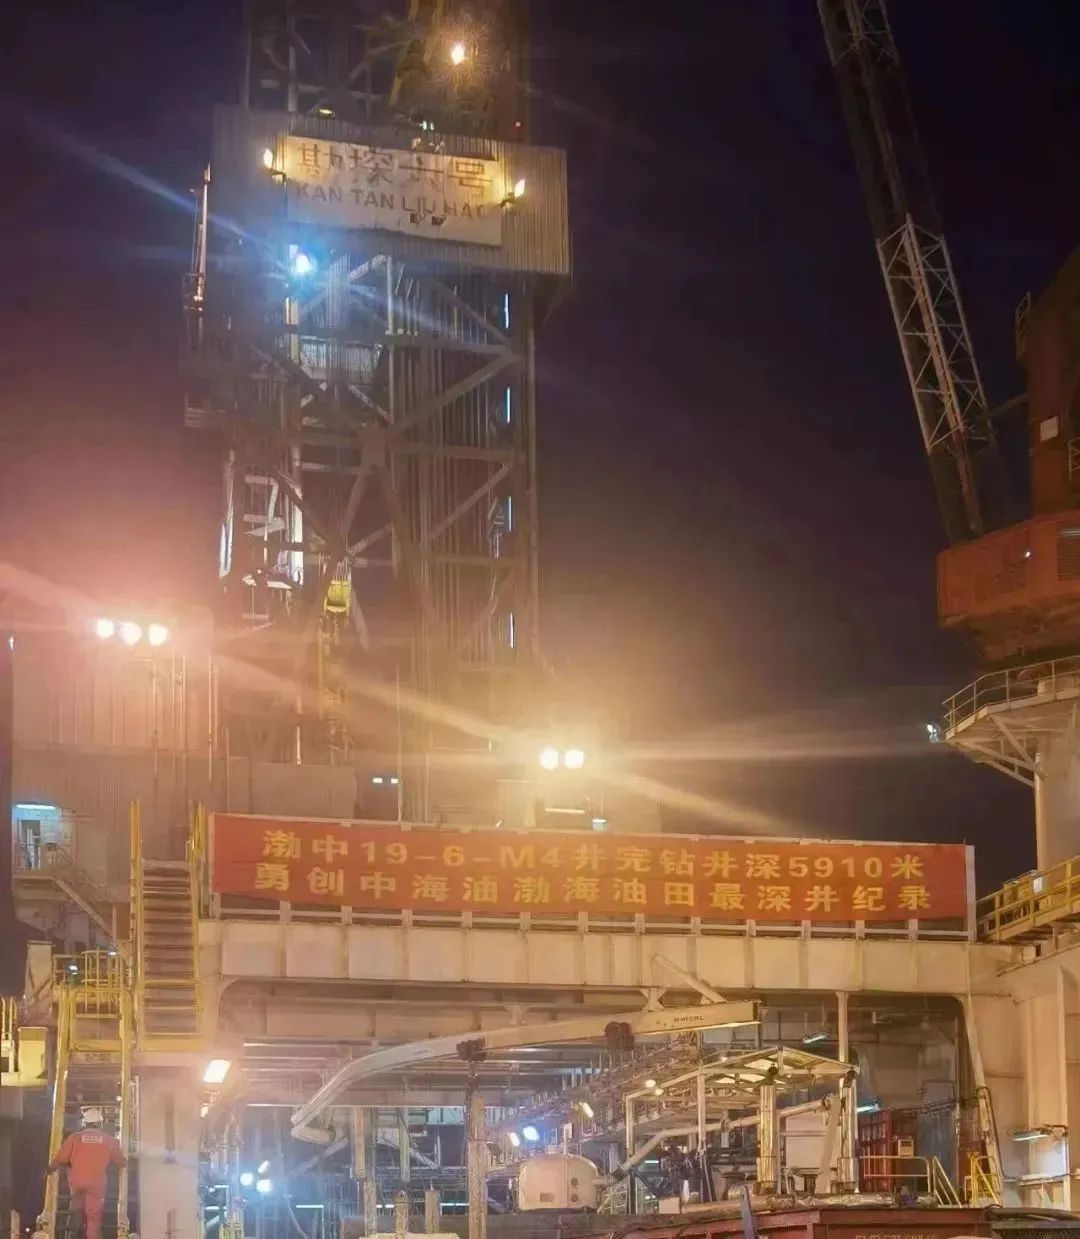 Rongsheng Technological Innovation In Managed Pressure Drilling Sets Another Record